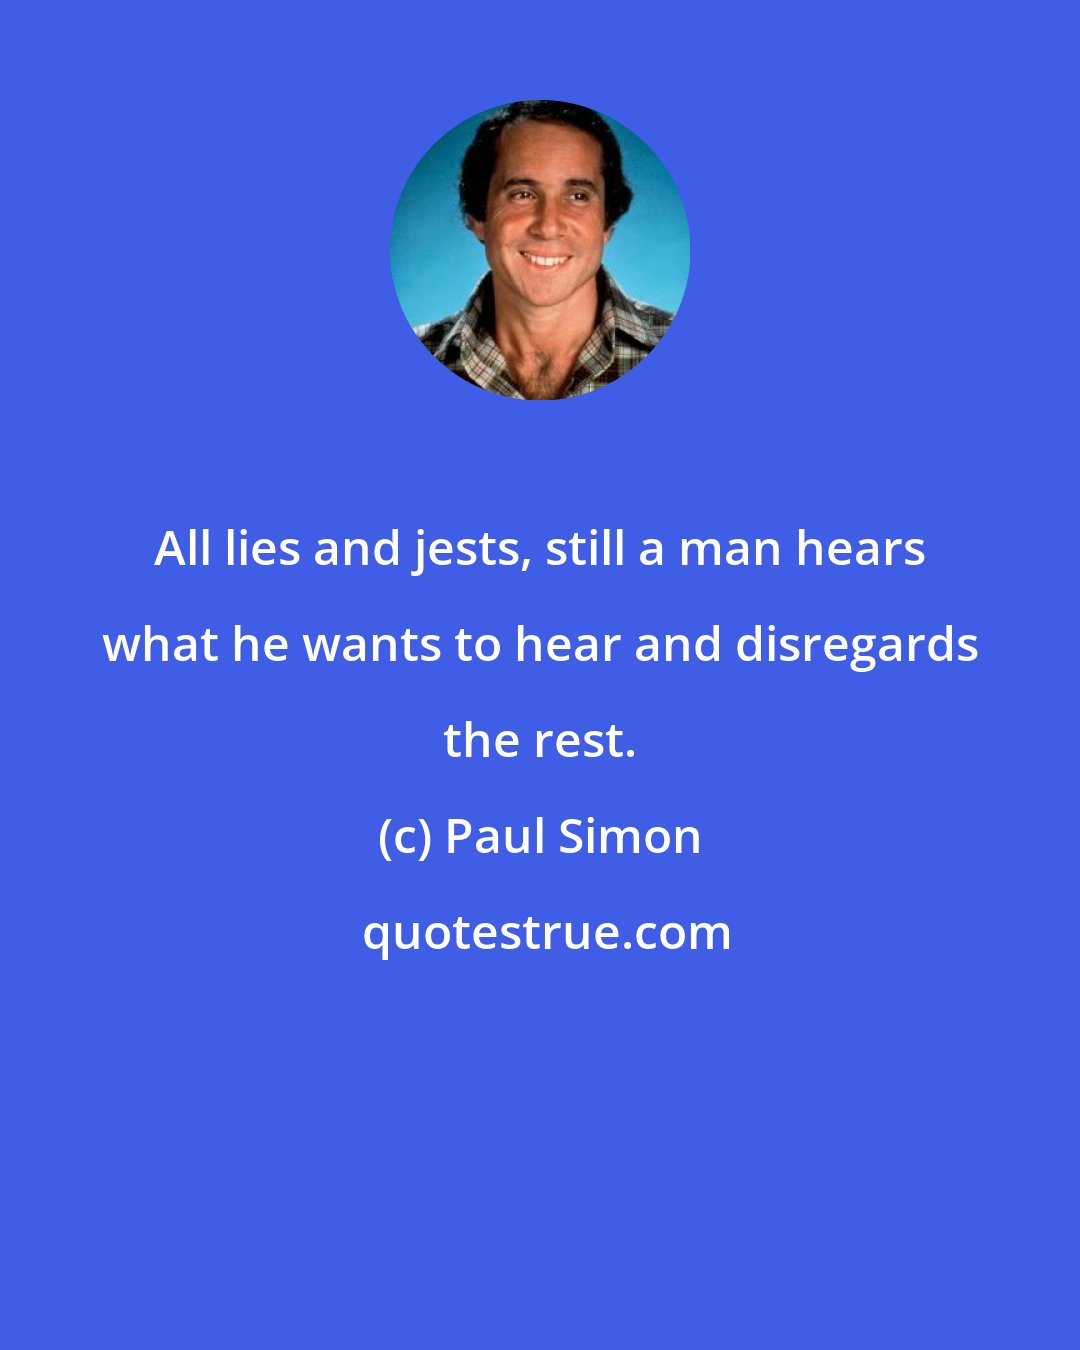 Paul Simon: All lies and jests, still a man hears what he wants to hear and disregards the rest.